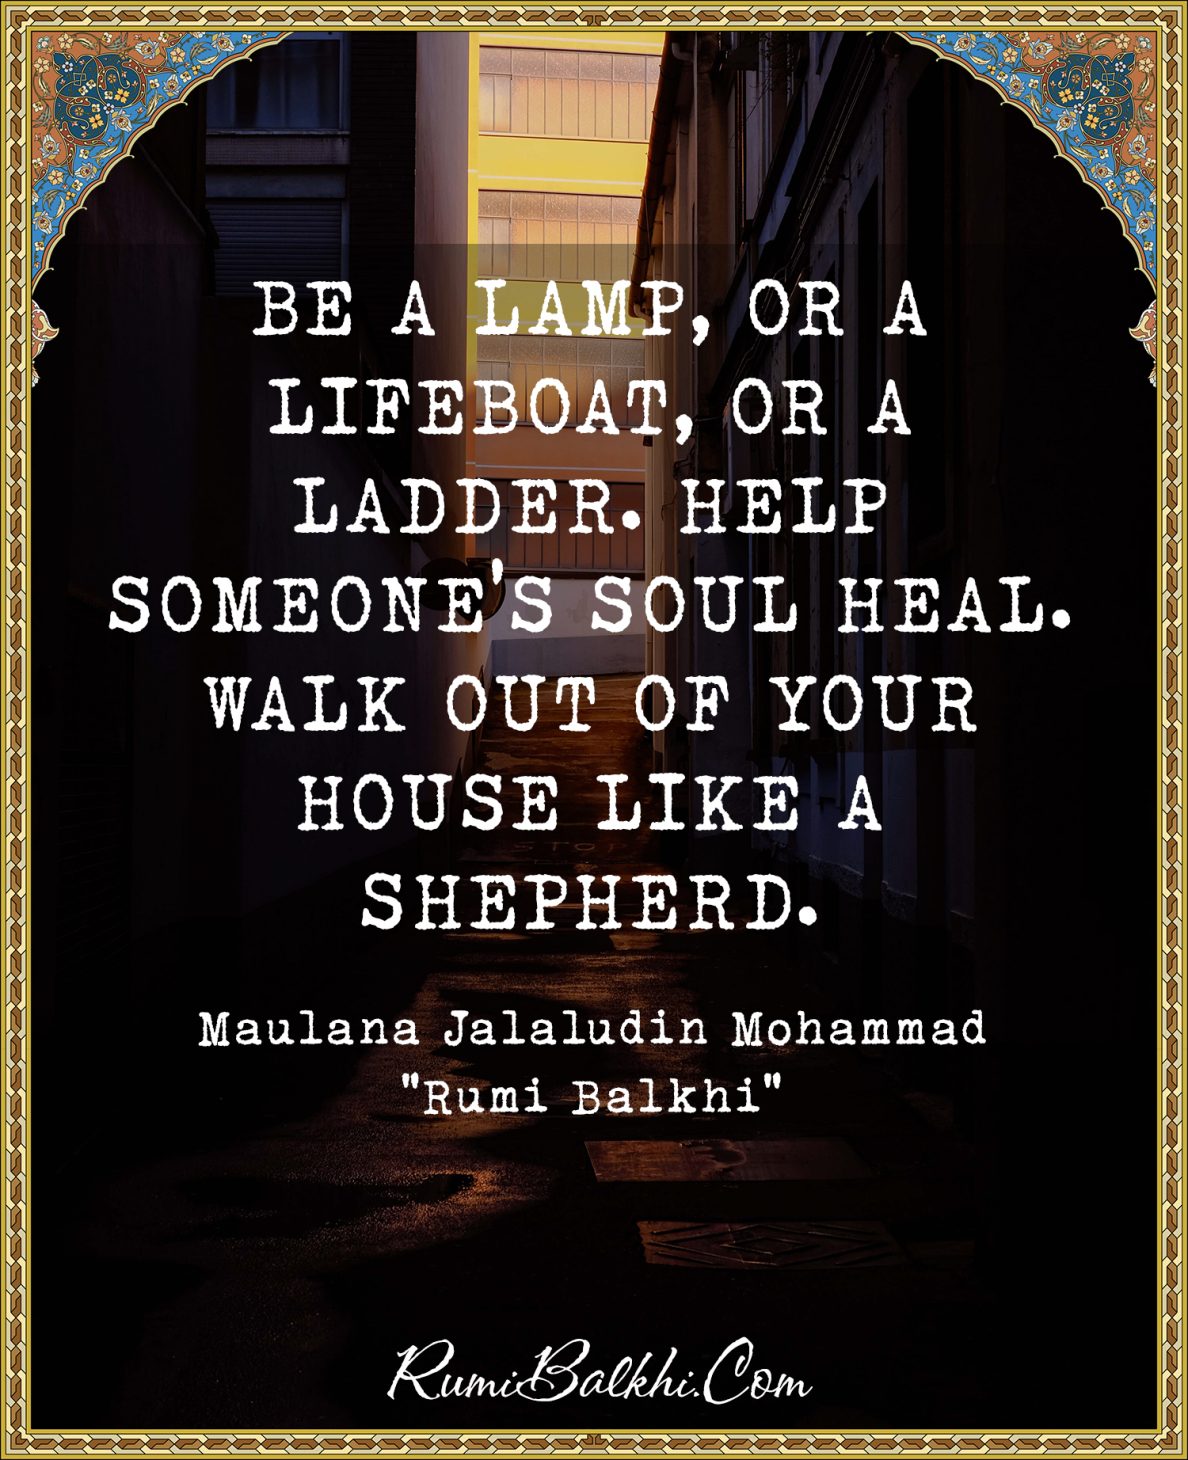 Be a lamp, or a lifeboat, or a ladder. Help someone’s soul heal. Walk out of your house like a shepherd